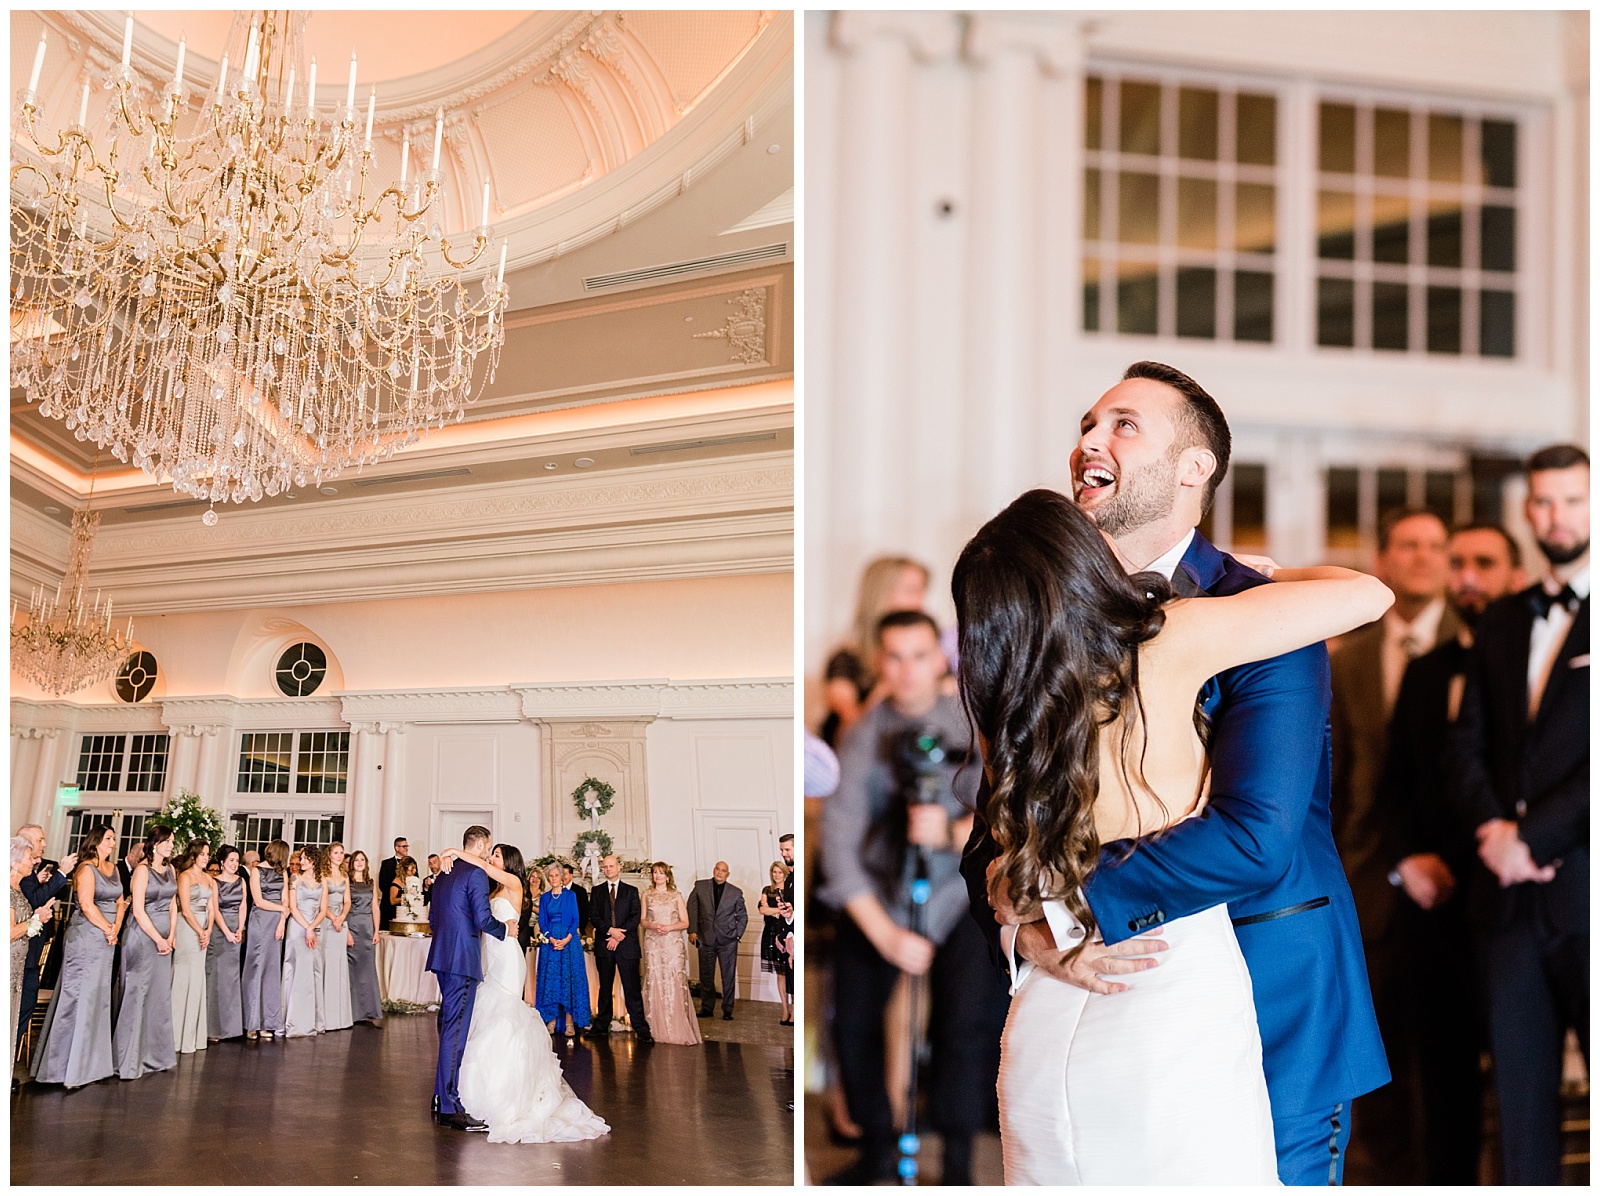 Park Chateau Wedding, Photographer, New Jersey, NJ, Winter, Reception, Ballroom, First Dance, Bride and Groom